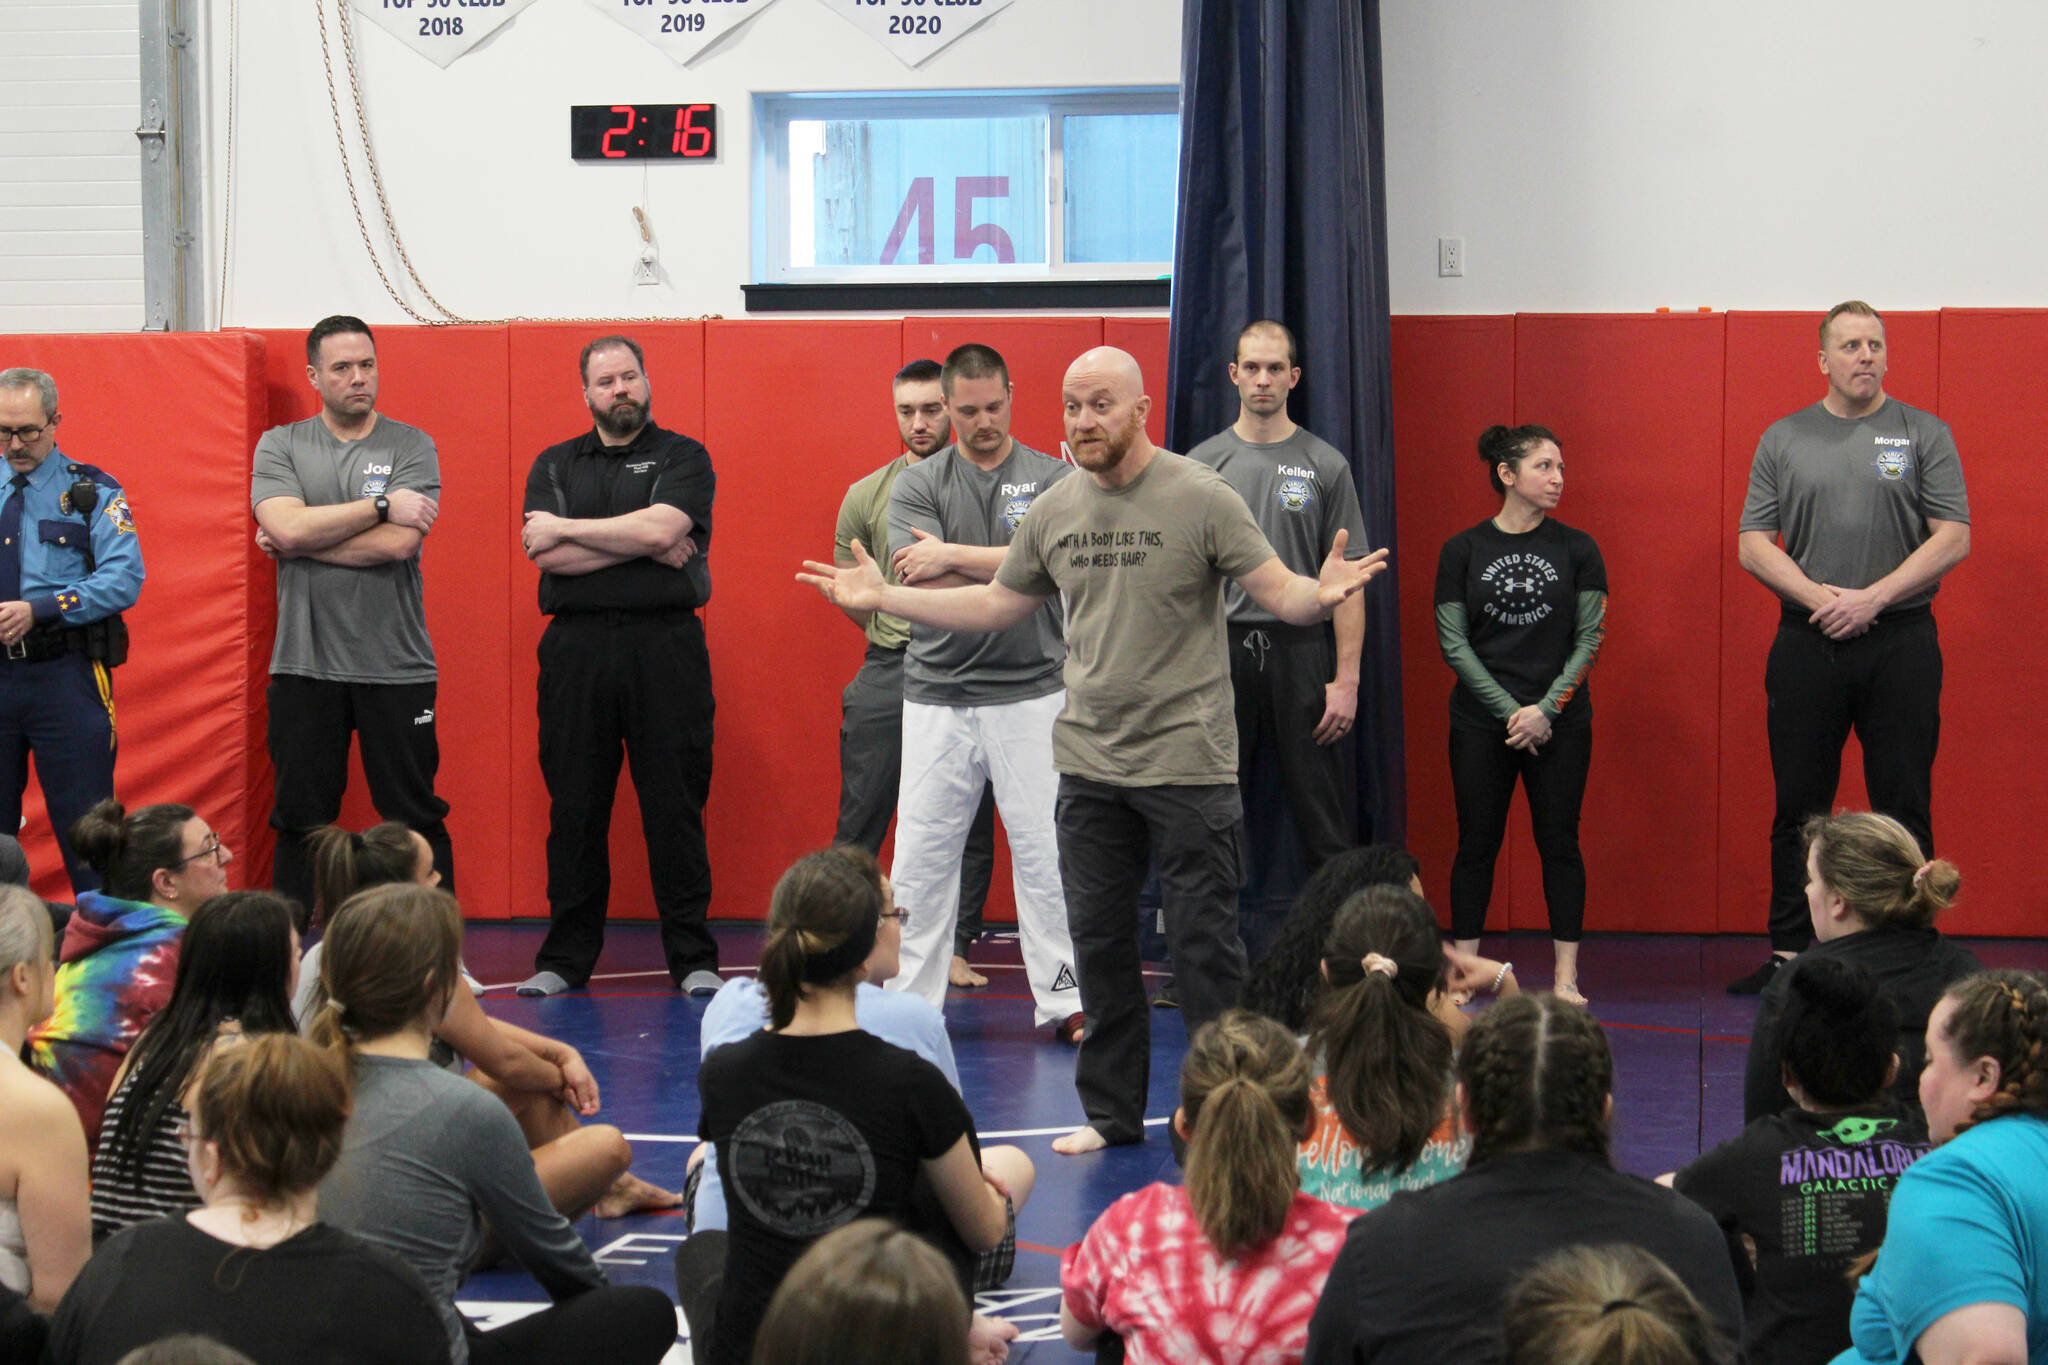 Soldotna Police Chief Gene Meek (center) speaks to attendees during a Toss A Cop event at the All American Training Center on Saturday, Jan. 21, 2023, in Soldotna, Alaska. (Ashlyn OHara/Peninsula Clarion)